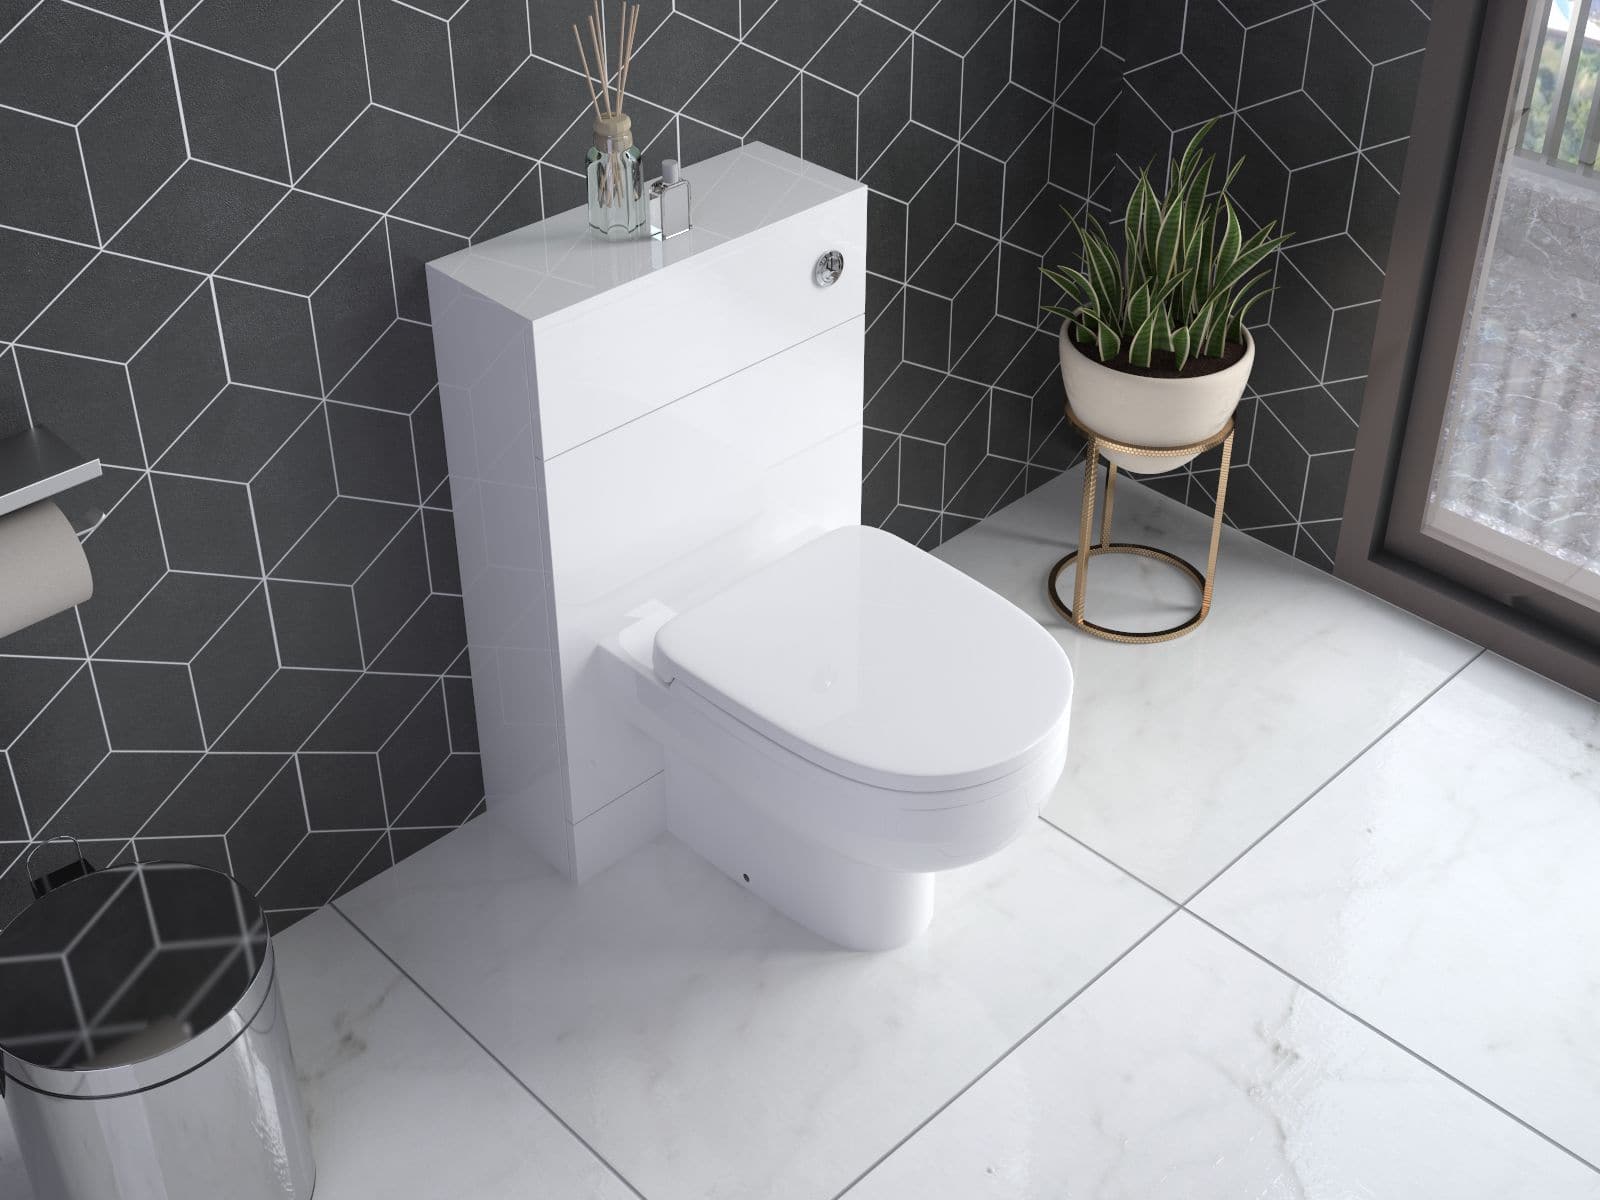 Modern white close coupled toilet with cistern and soft close seat (SLK630) for a contemporary bathroom. Ideal for stylish UK bathrooms. Available at Bathroom4less.